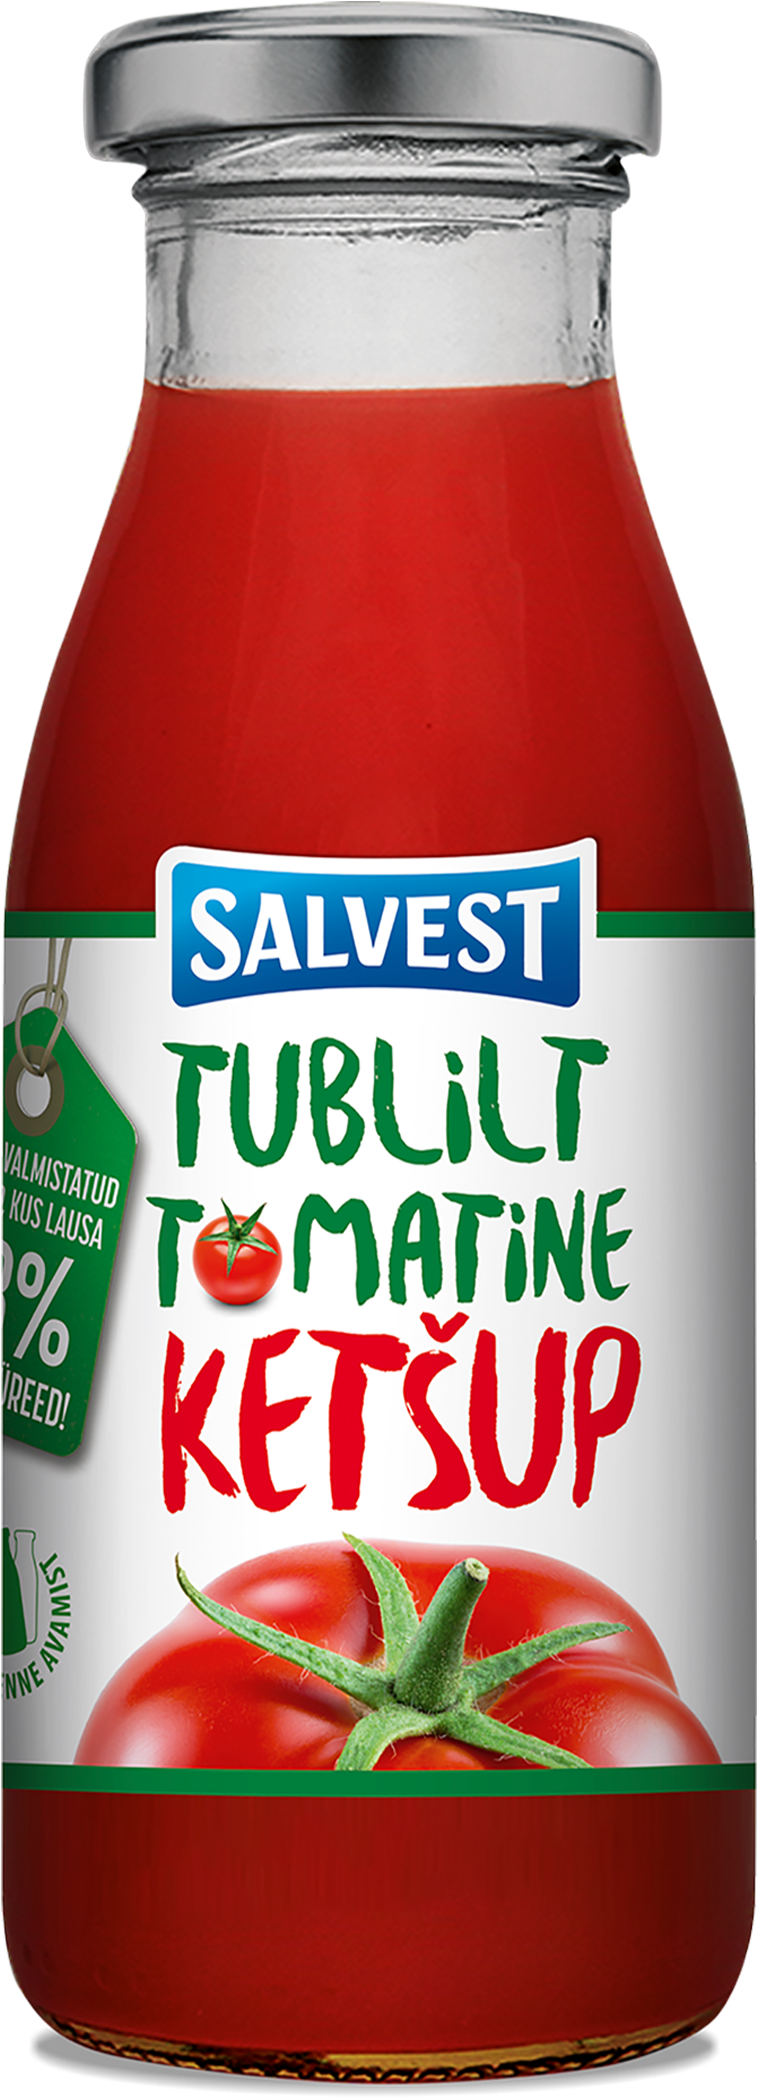 A Bottle Of Ketchup With A Label